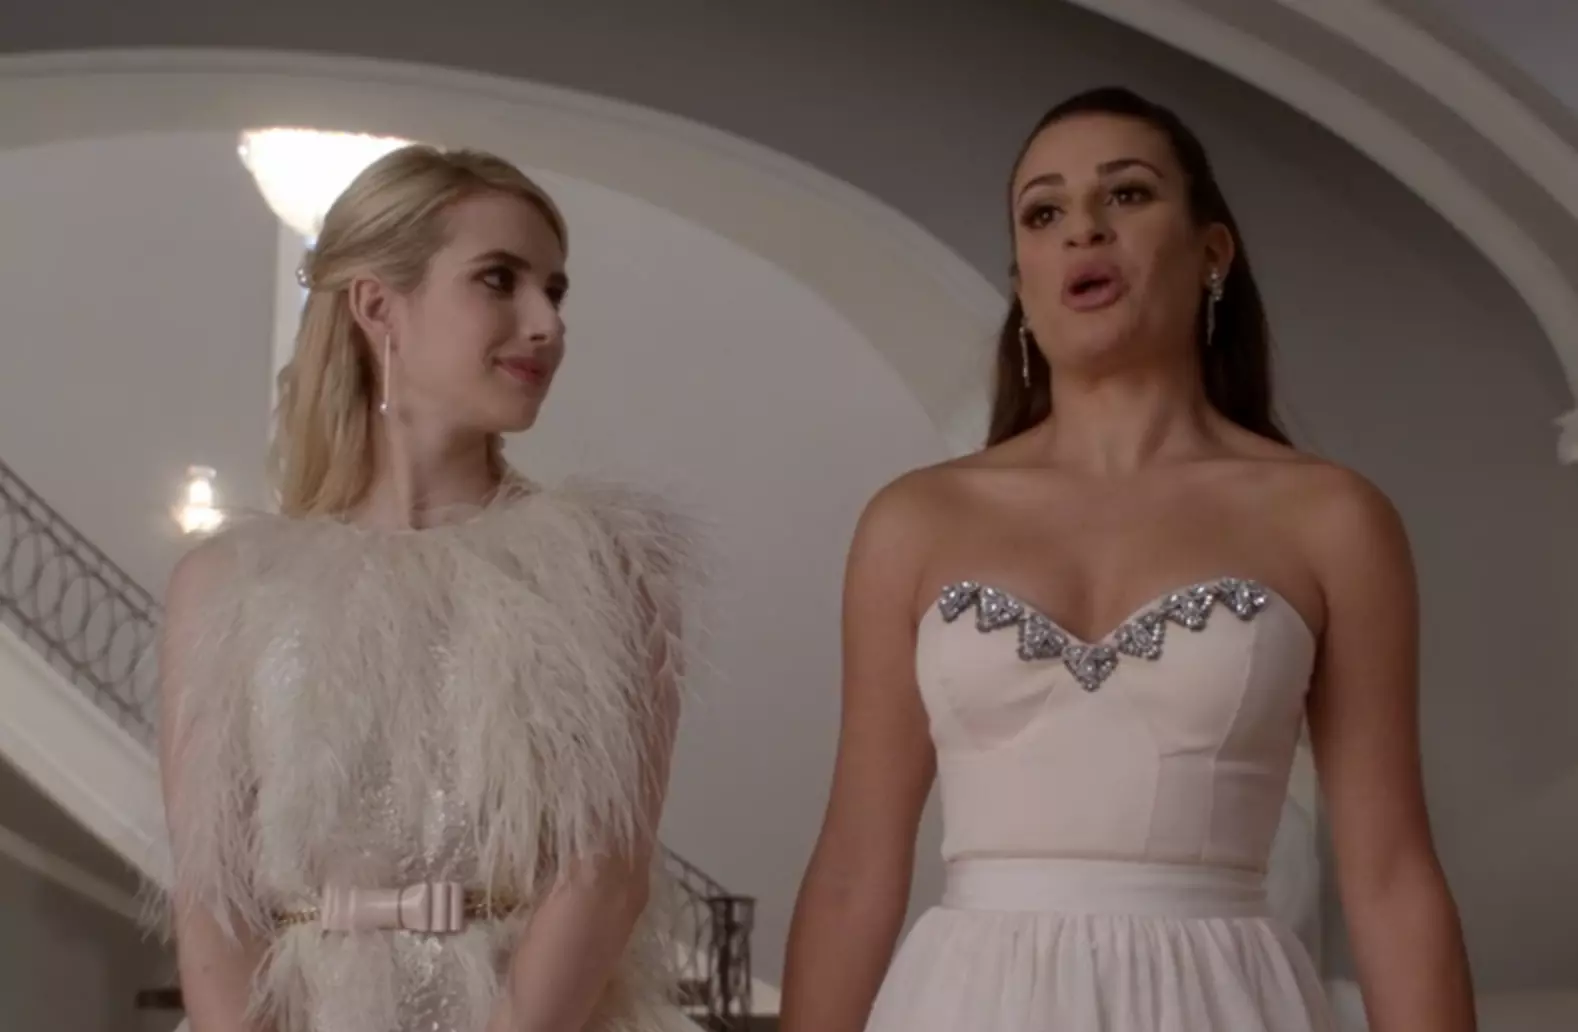 Photos from Scream Queens Style: How to Be a Chanel in 9 Easy Steps